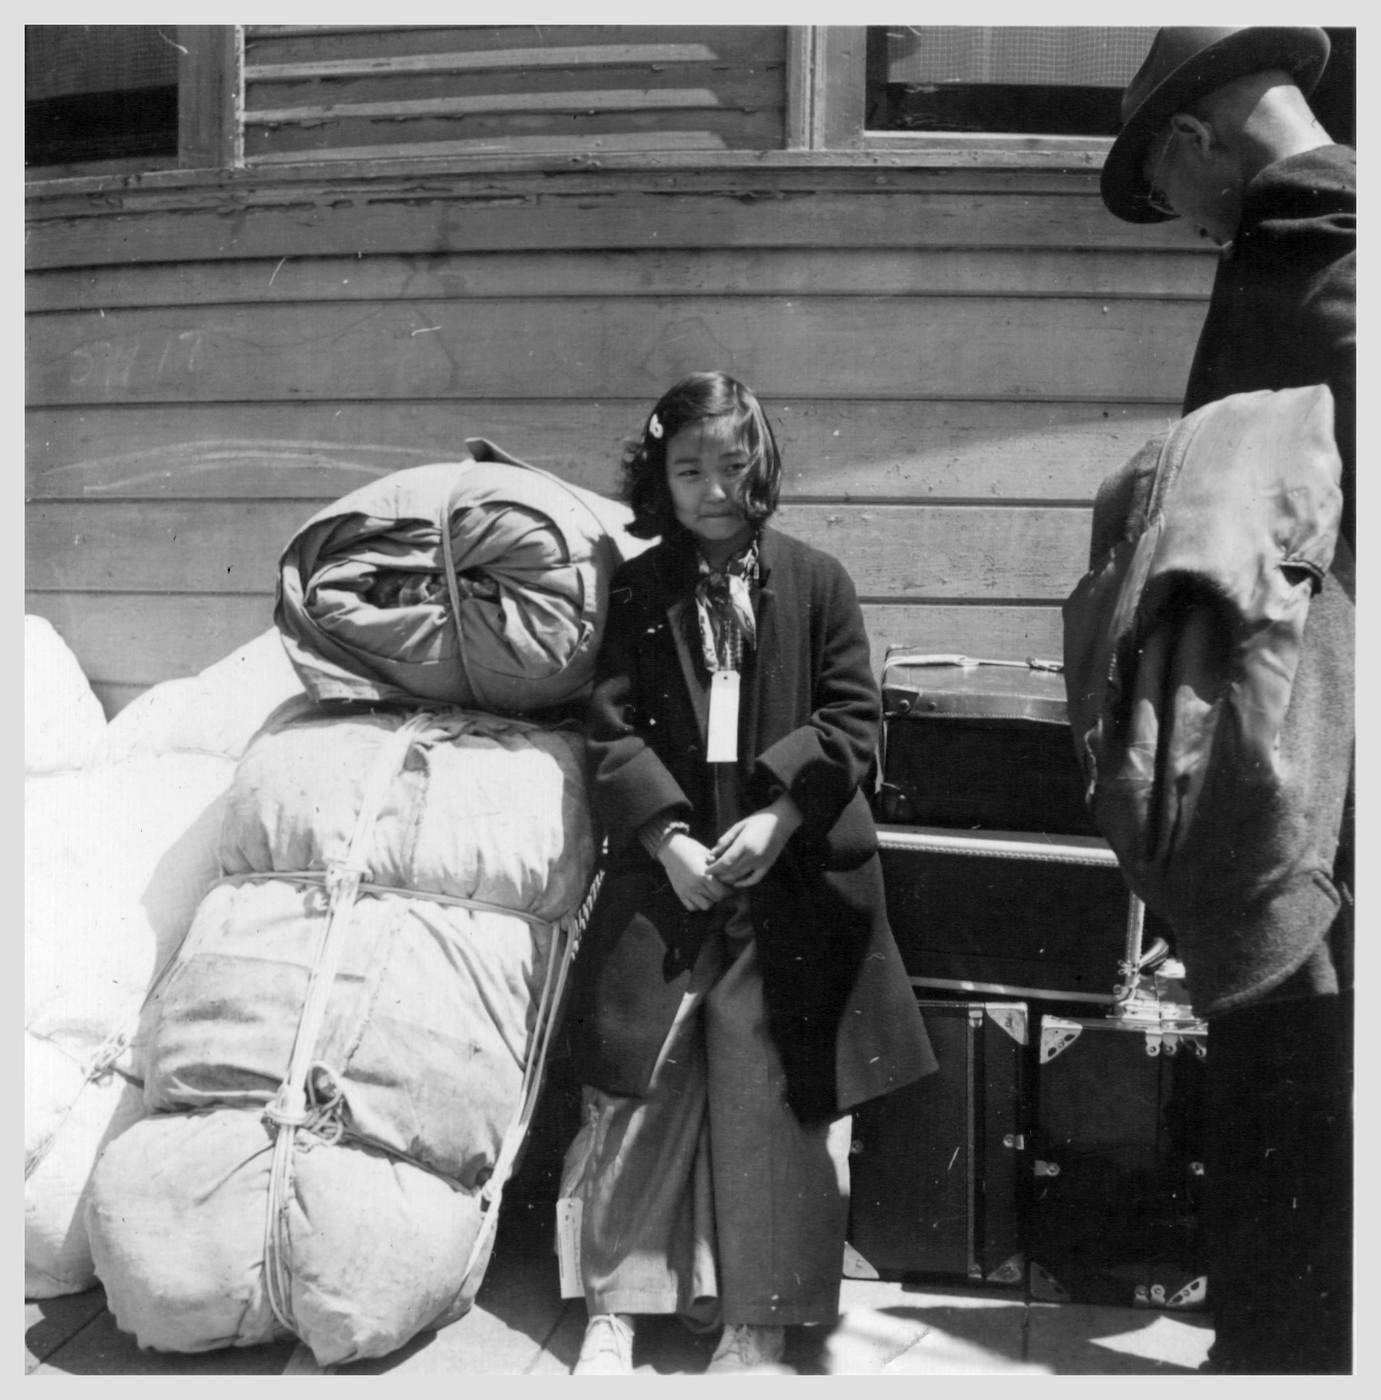 Oakland, Calif. (Oak Street)-- Young evacuee, Kimiko Kitagaki,11, of Japanese ancestry guarding the family belongings near the WCCA Control Station at 1118 Oak Street in Oakland, Calif. In half an hour the evacuation bus will depart for Tanforan Assembly center. and from there to a permanent detention center in the Utah desert at Topaz Interment Camp. Photographer: Lange, Dorothea -- Oakland, California. 5/ 6/ 42 Contributing Institution: UC Berkeley, Bancroft Library